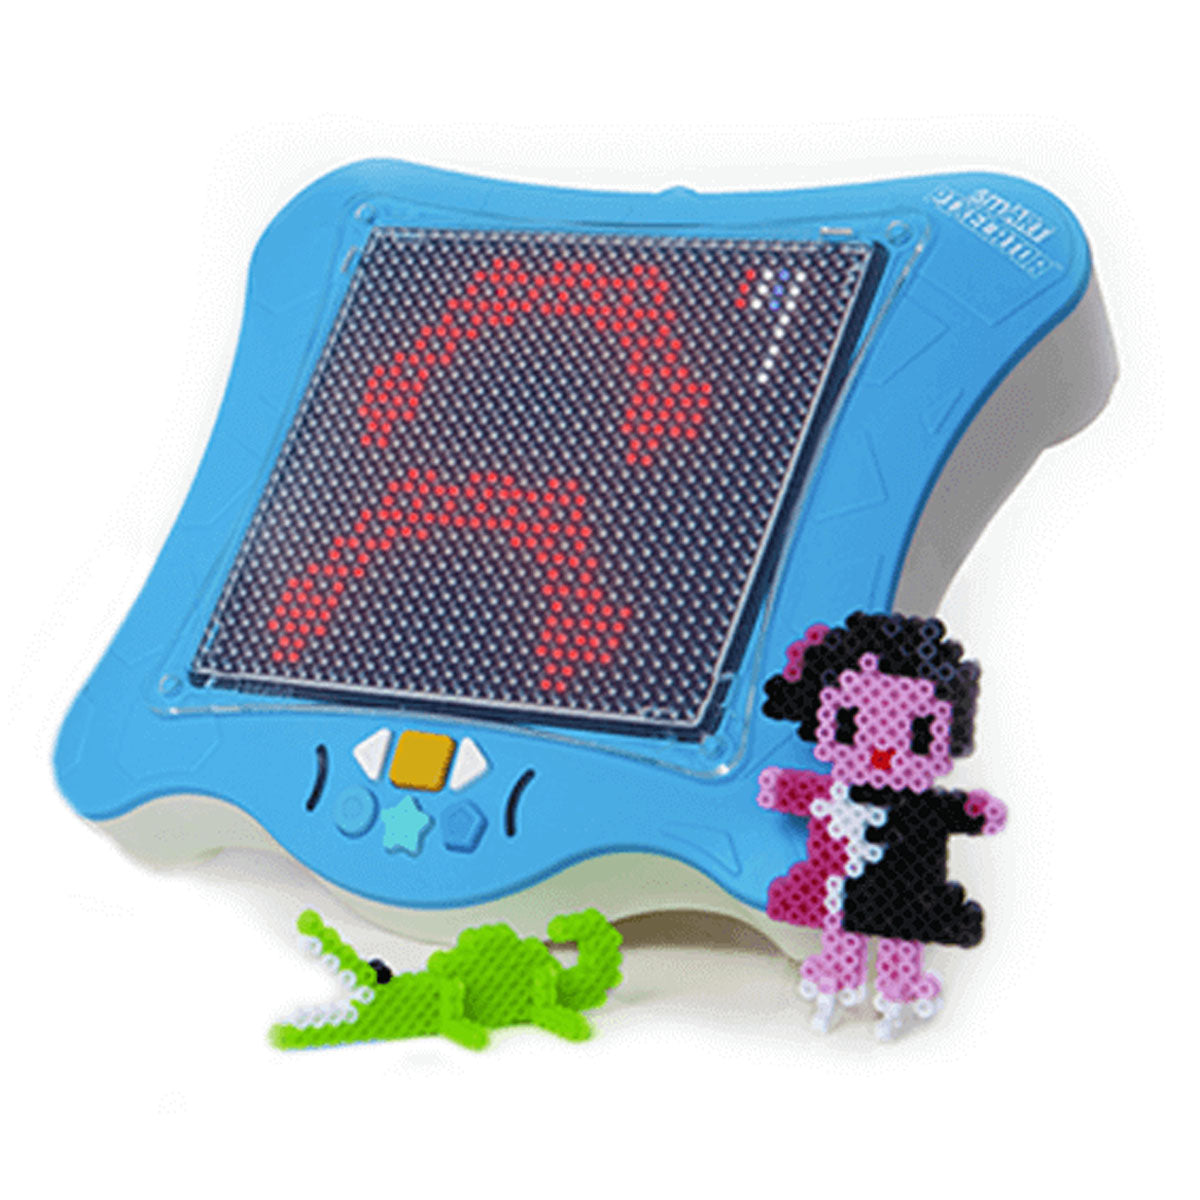 Make Awesome Bead Designs With the smART Pixelator 